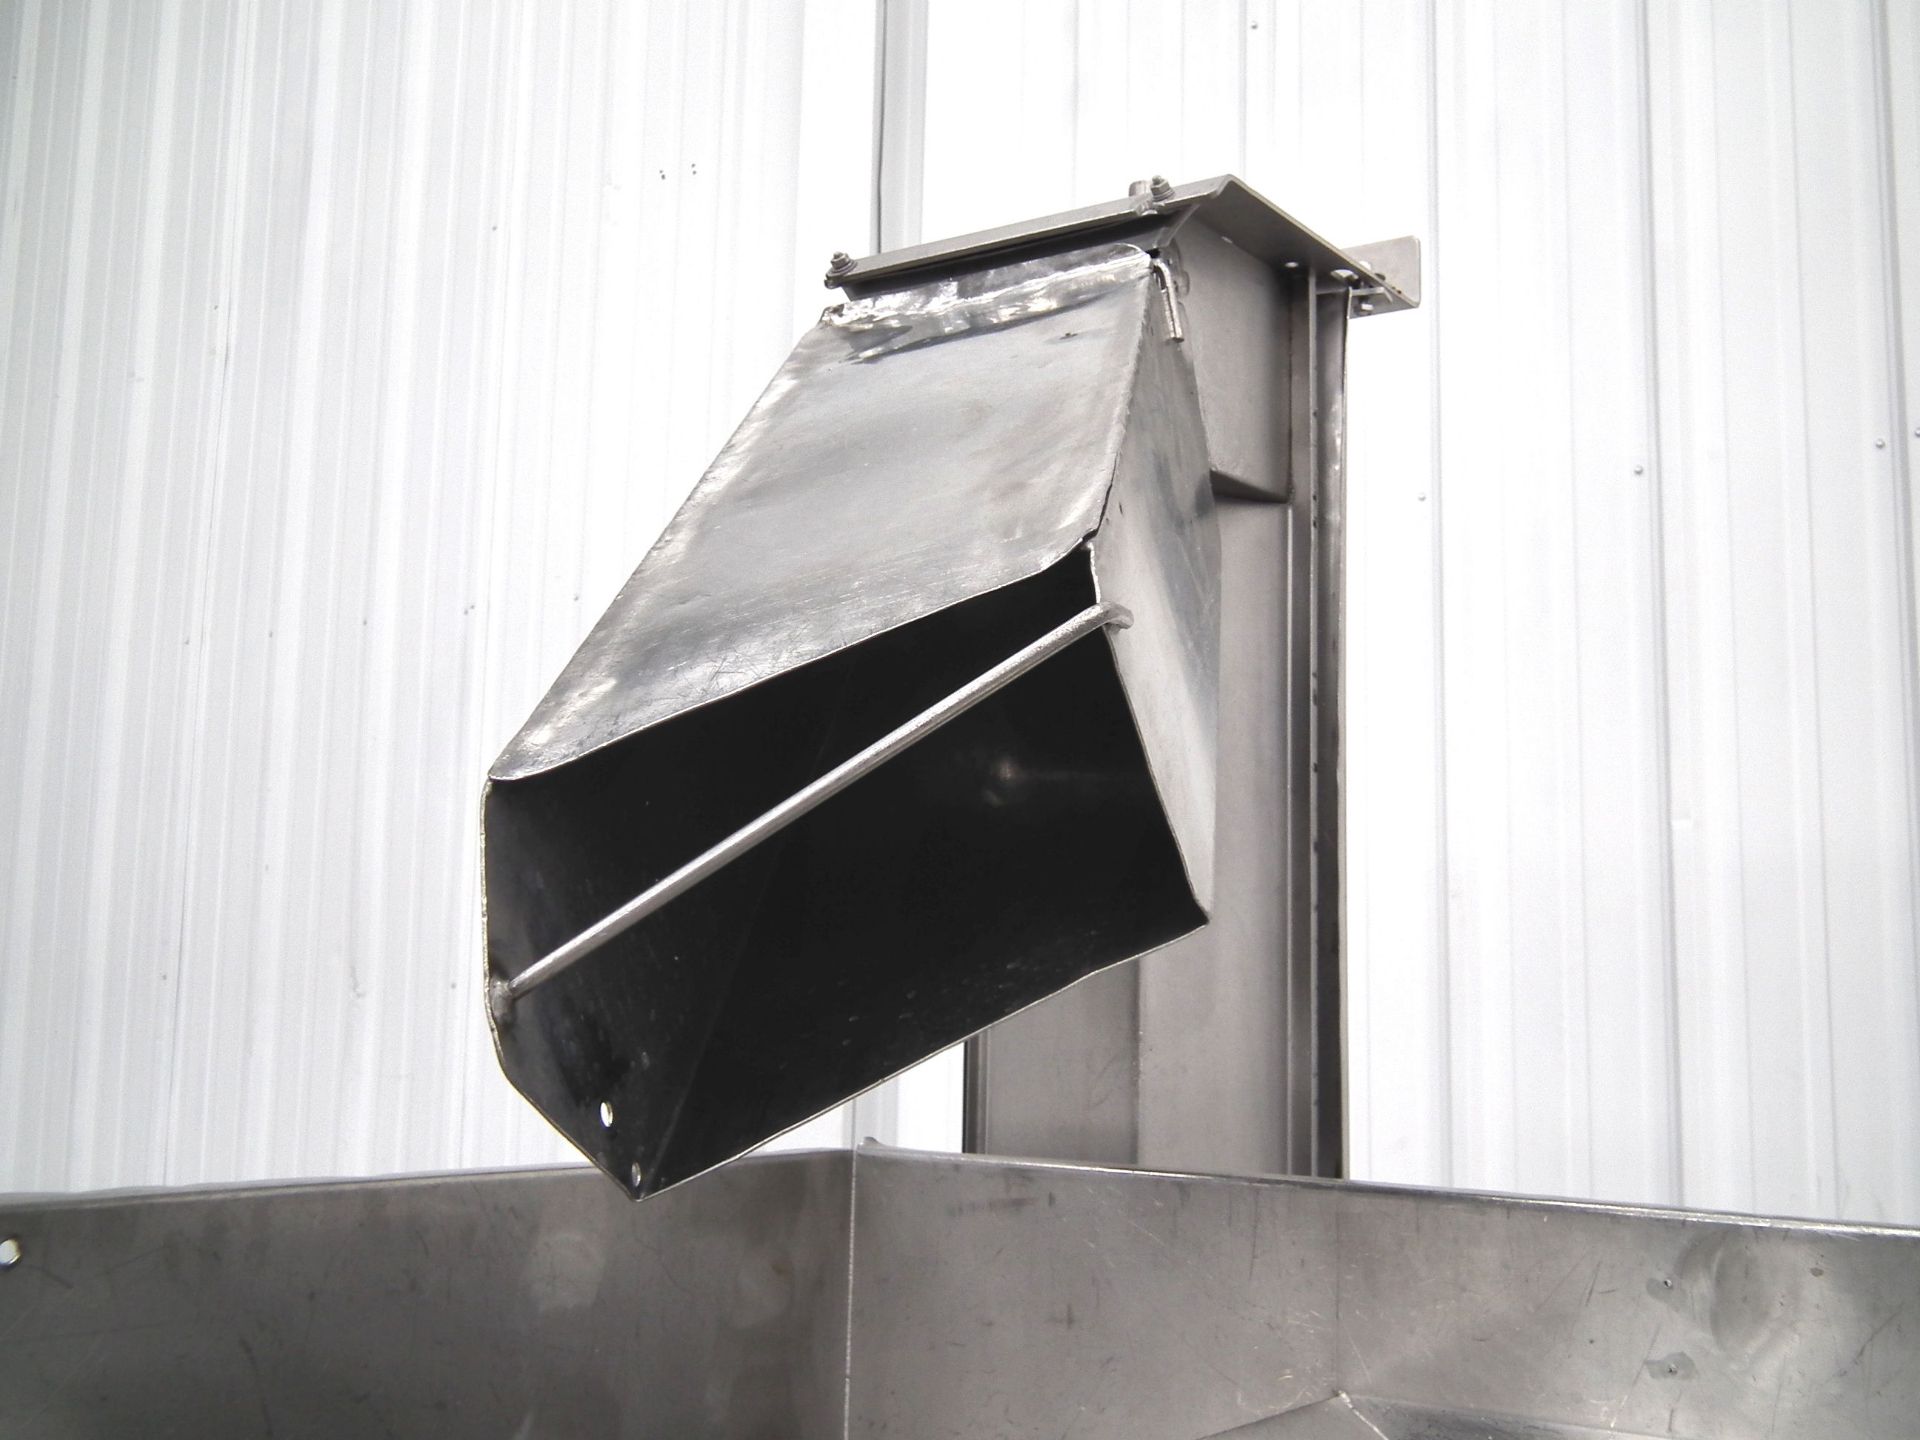 Stein Breading Applicator with Conveyor (Rigging Fee - $285) - Image 10 of 17